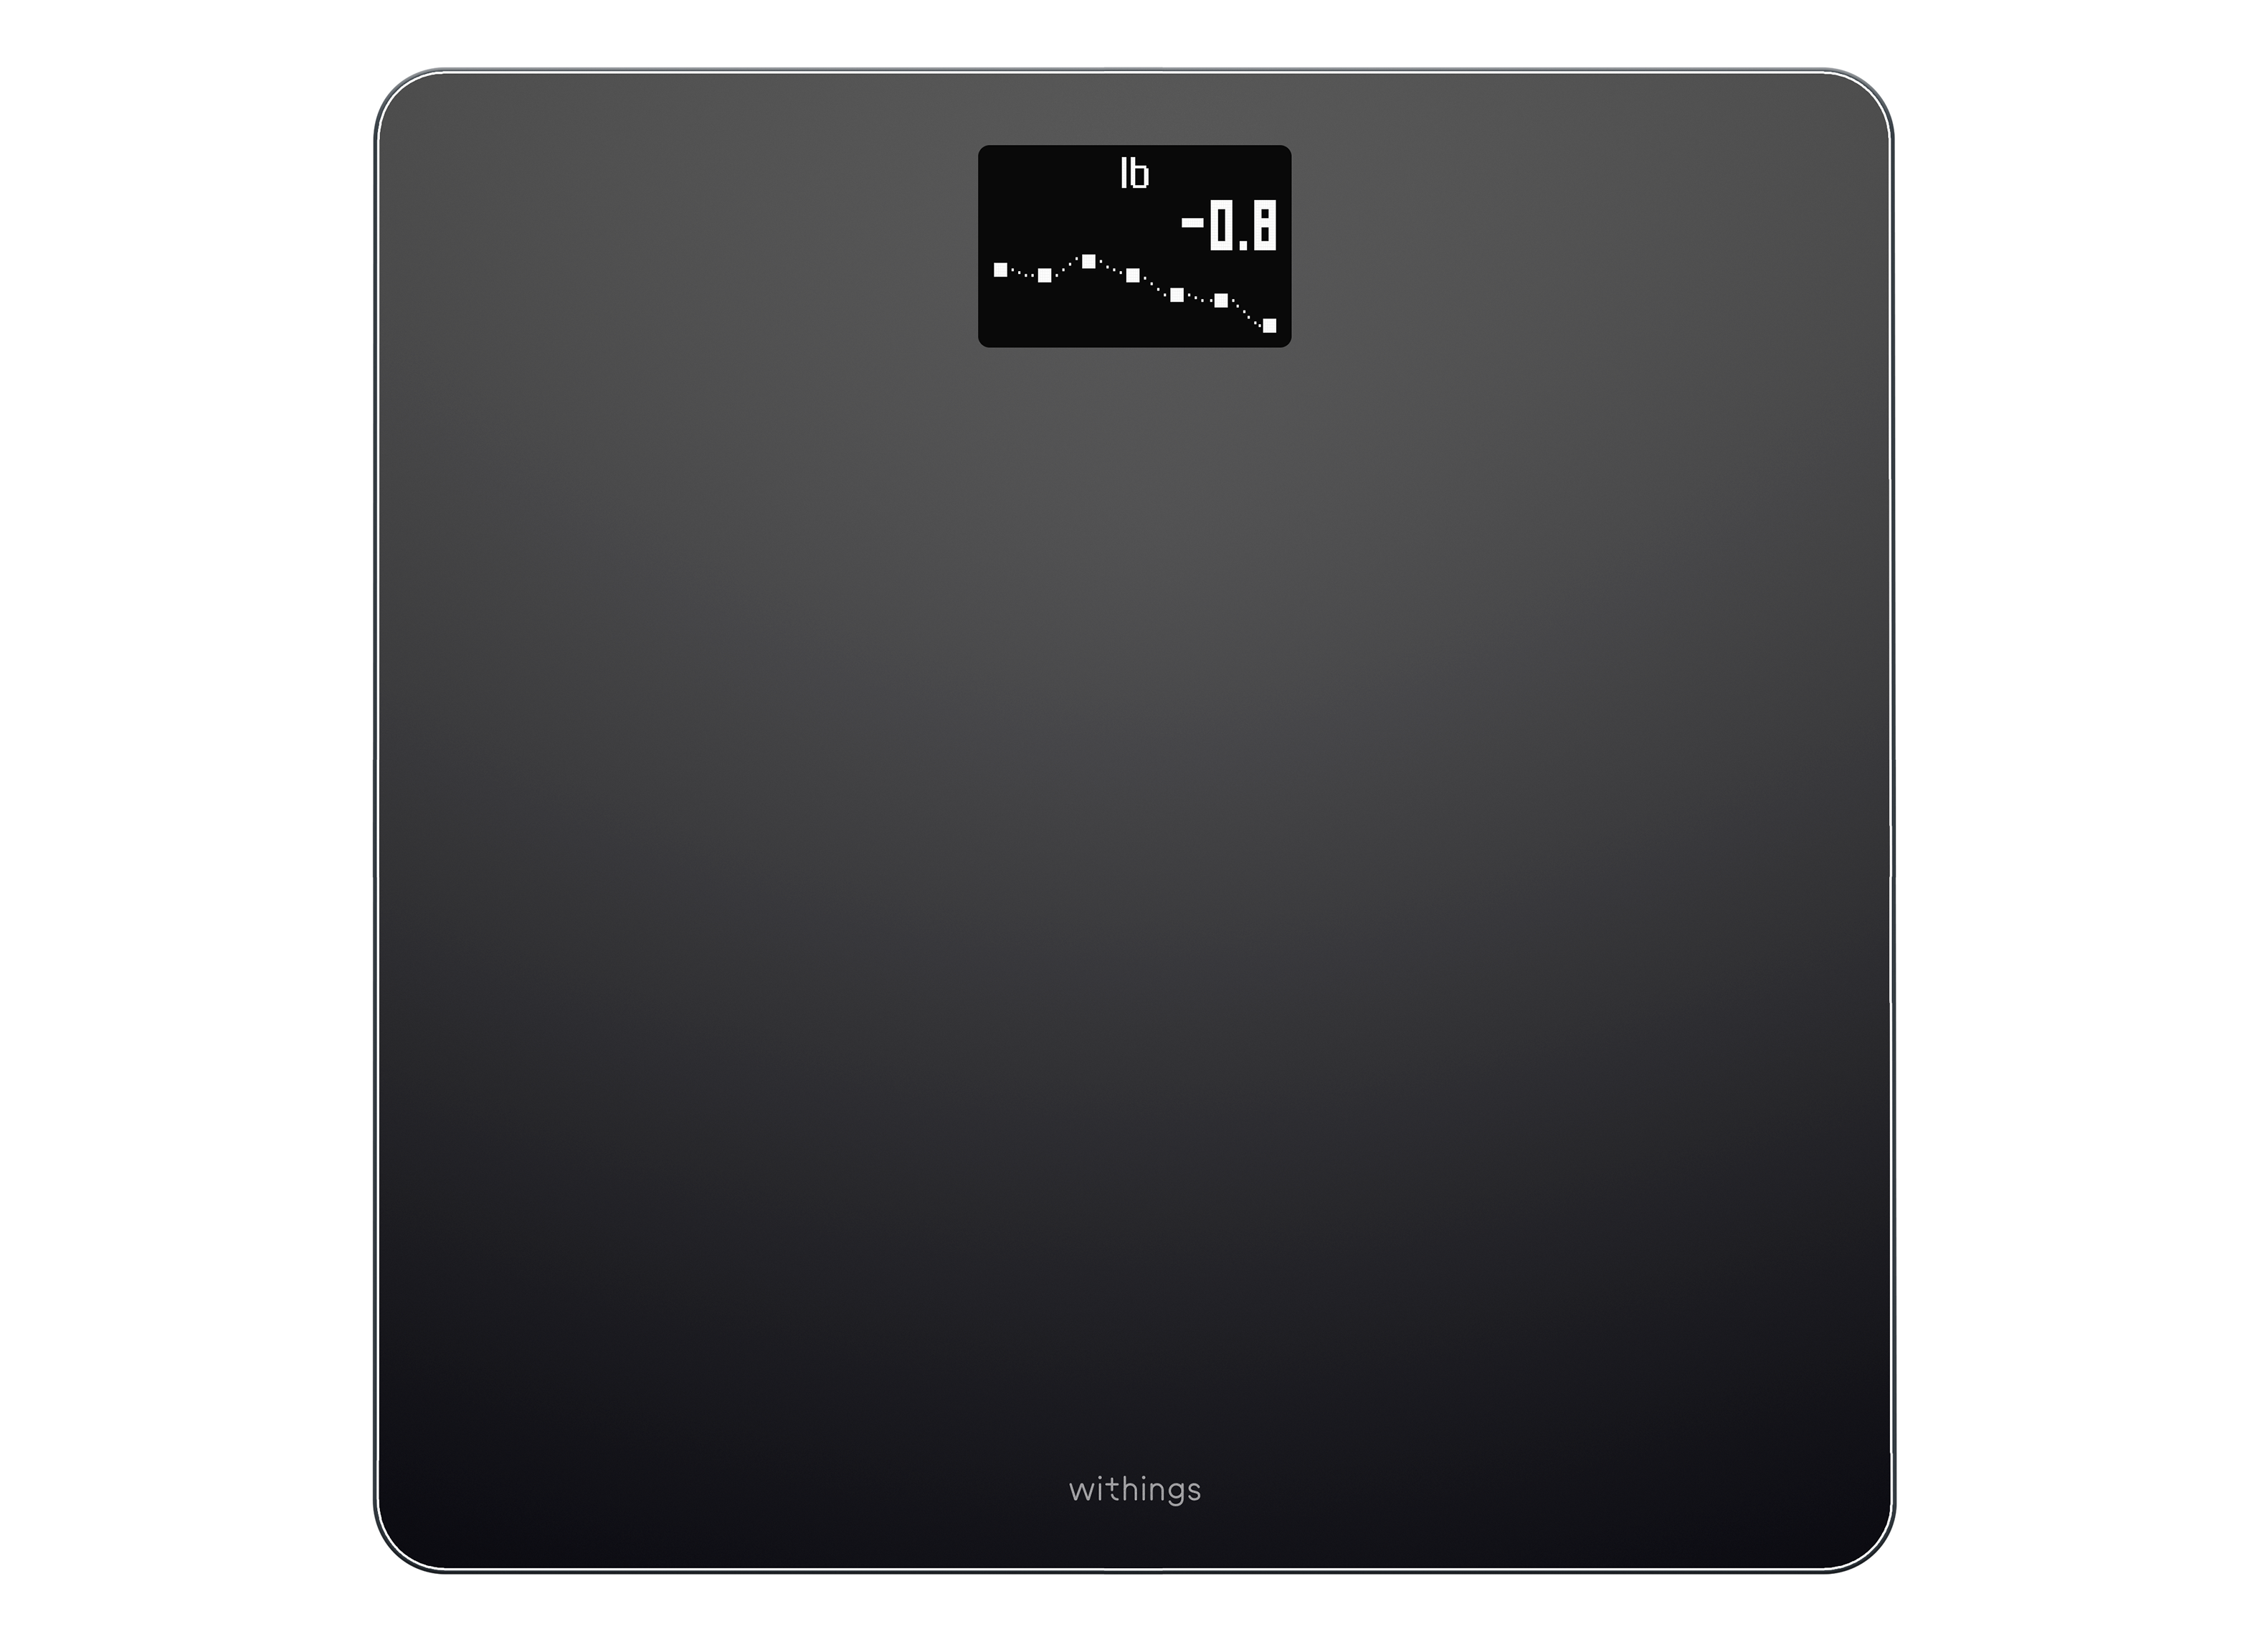 https://crdms.images.consumerreports.org/prod/products/cr/models/402912-digital-scales-withings-body-smart-weight-bmi-wi-fi-digital-scale-with-smartphone-app-10017544.png